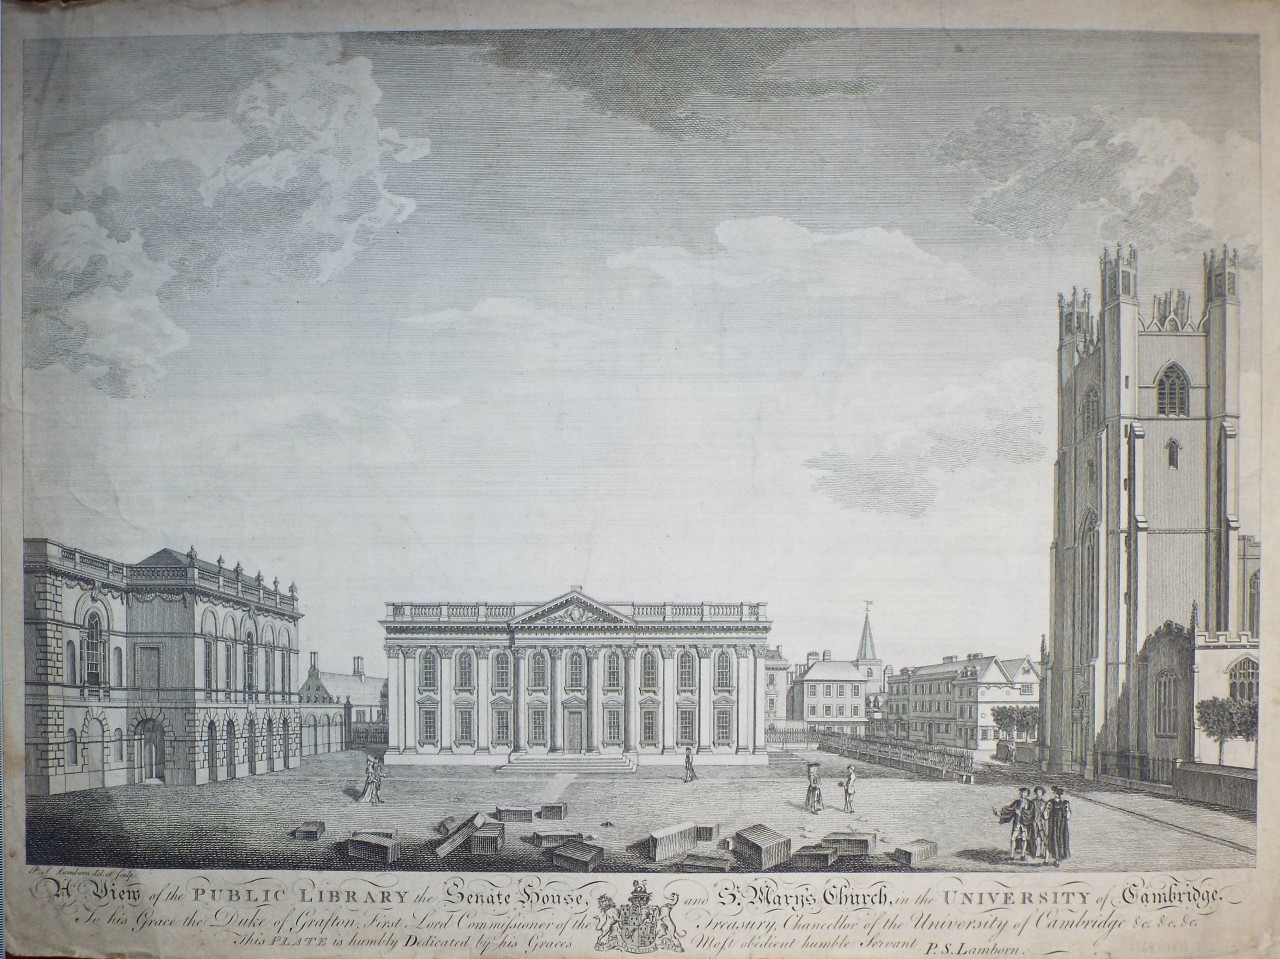 Print - A View of the Public Library, the Senate House, and St. Mary's Church, in the University of Cambridge. - Lamborn